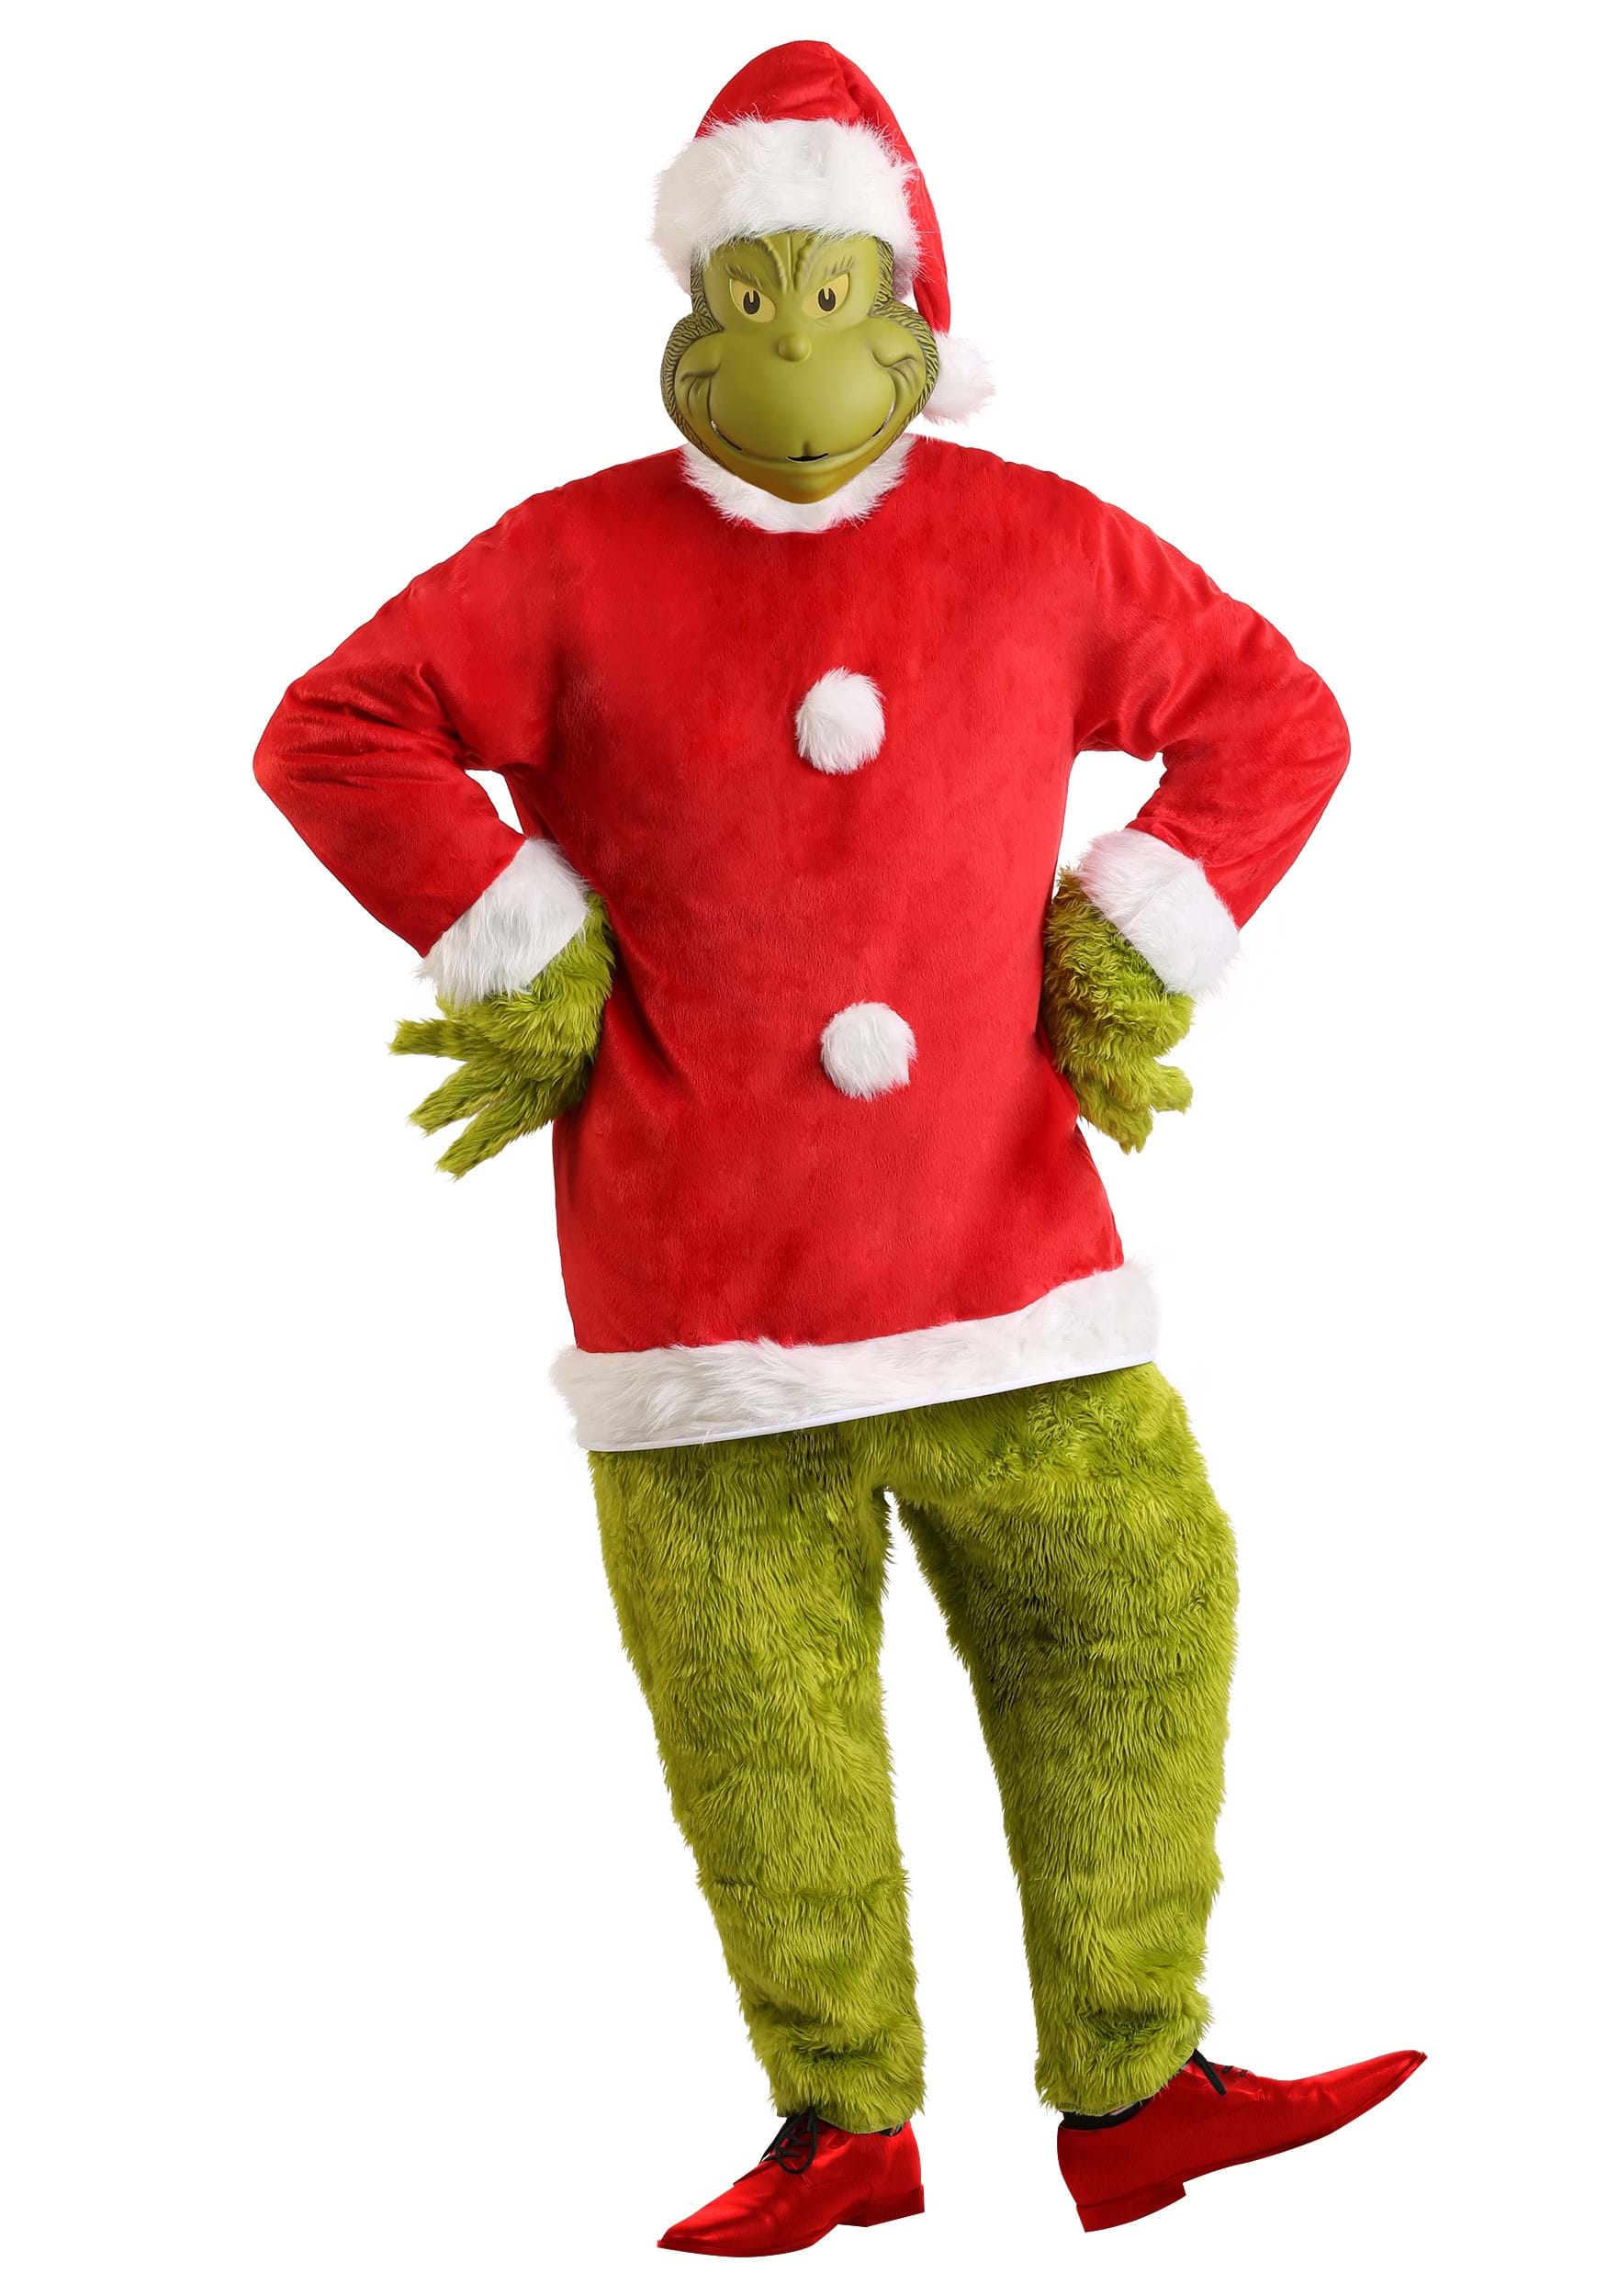 Photos - Fancy Dress SanTa FUN Costumes The Grinch  Deluxe Jumpsuit with Mask Costume for Men Gr 